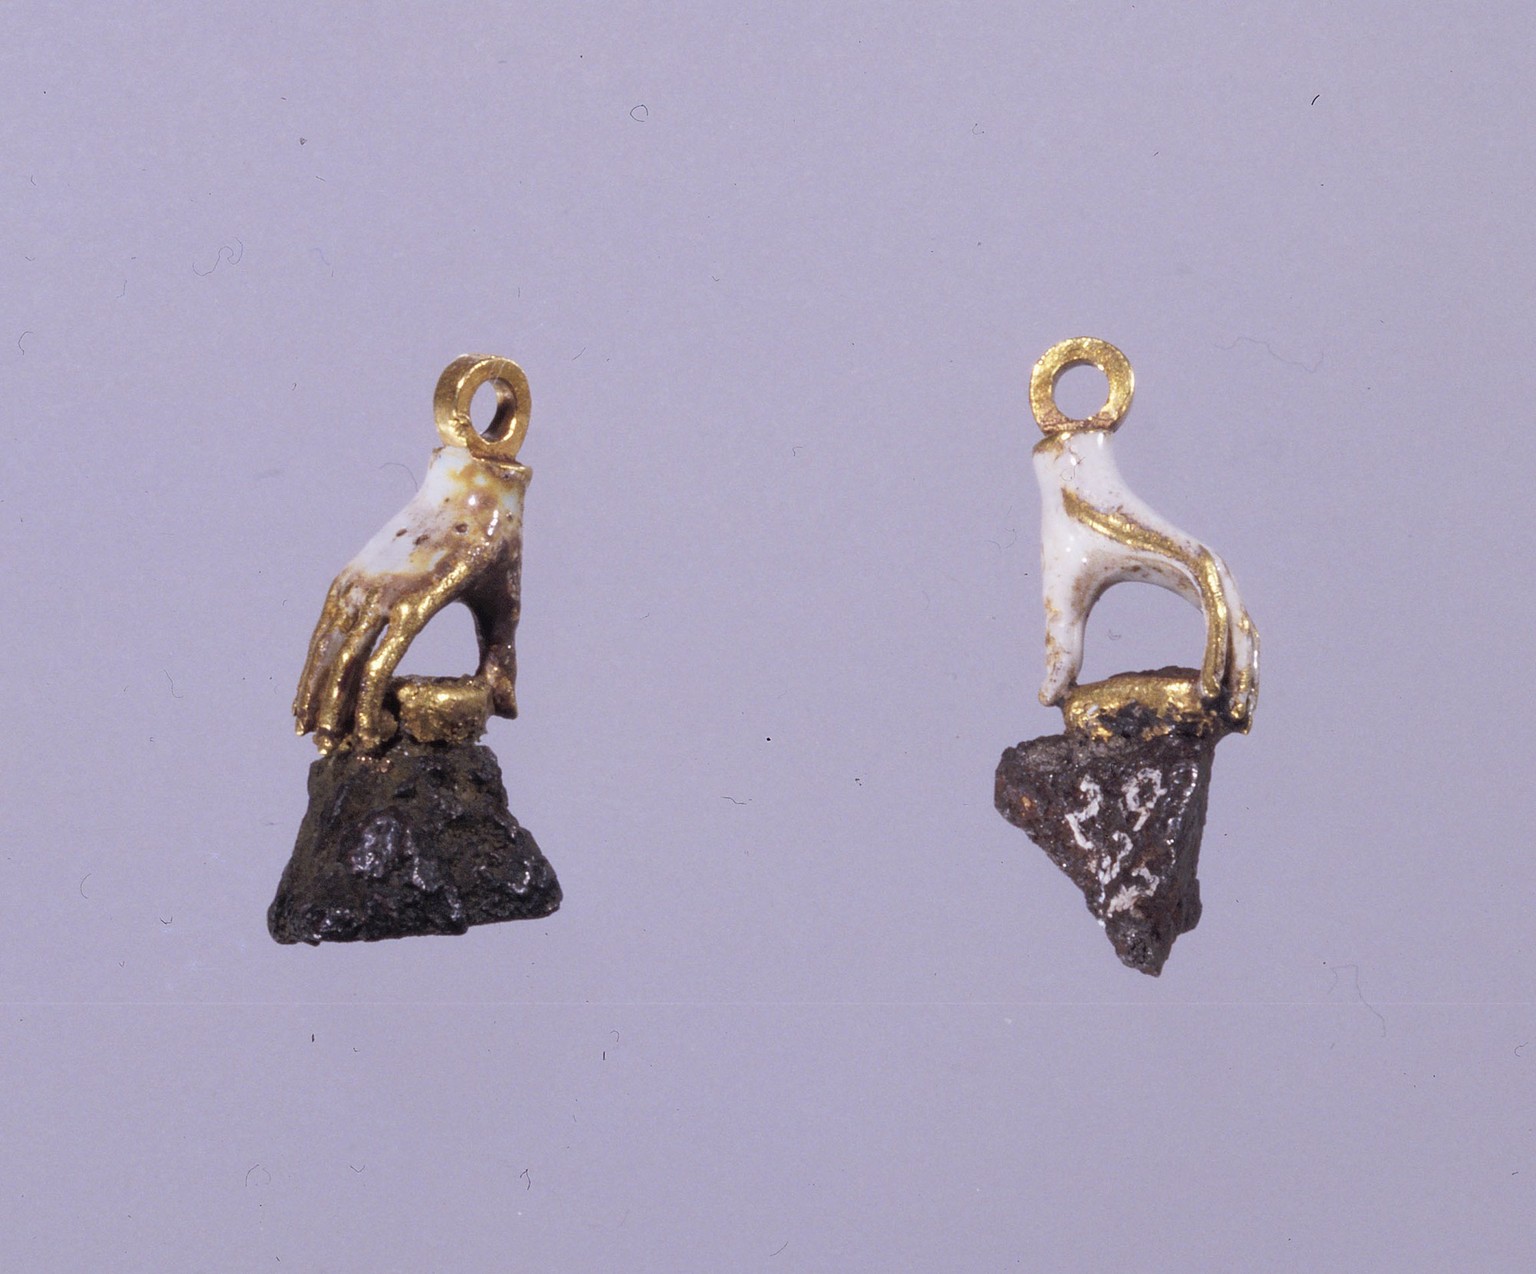 Ear ornaments in white gold enamel shaped as hands, holding splinters from a blown up cannon and a Swedish cannon ball that injured Christian IV in the naval battle of Kolberger Heide. The ornaments b ...